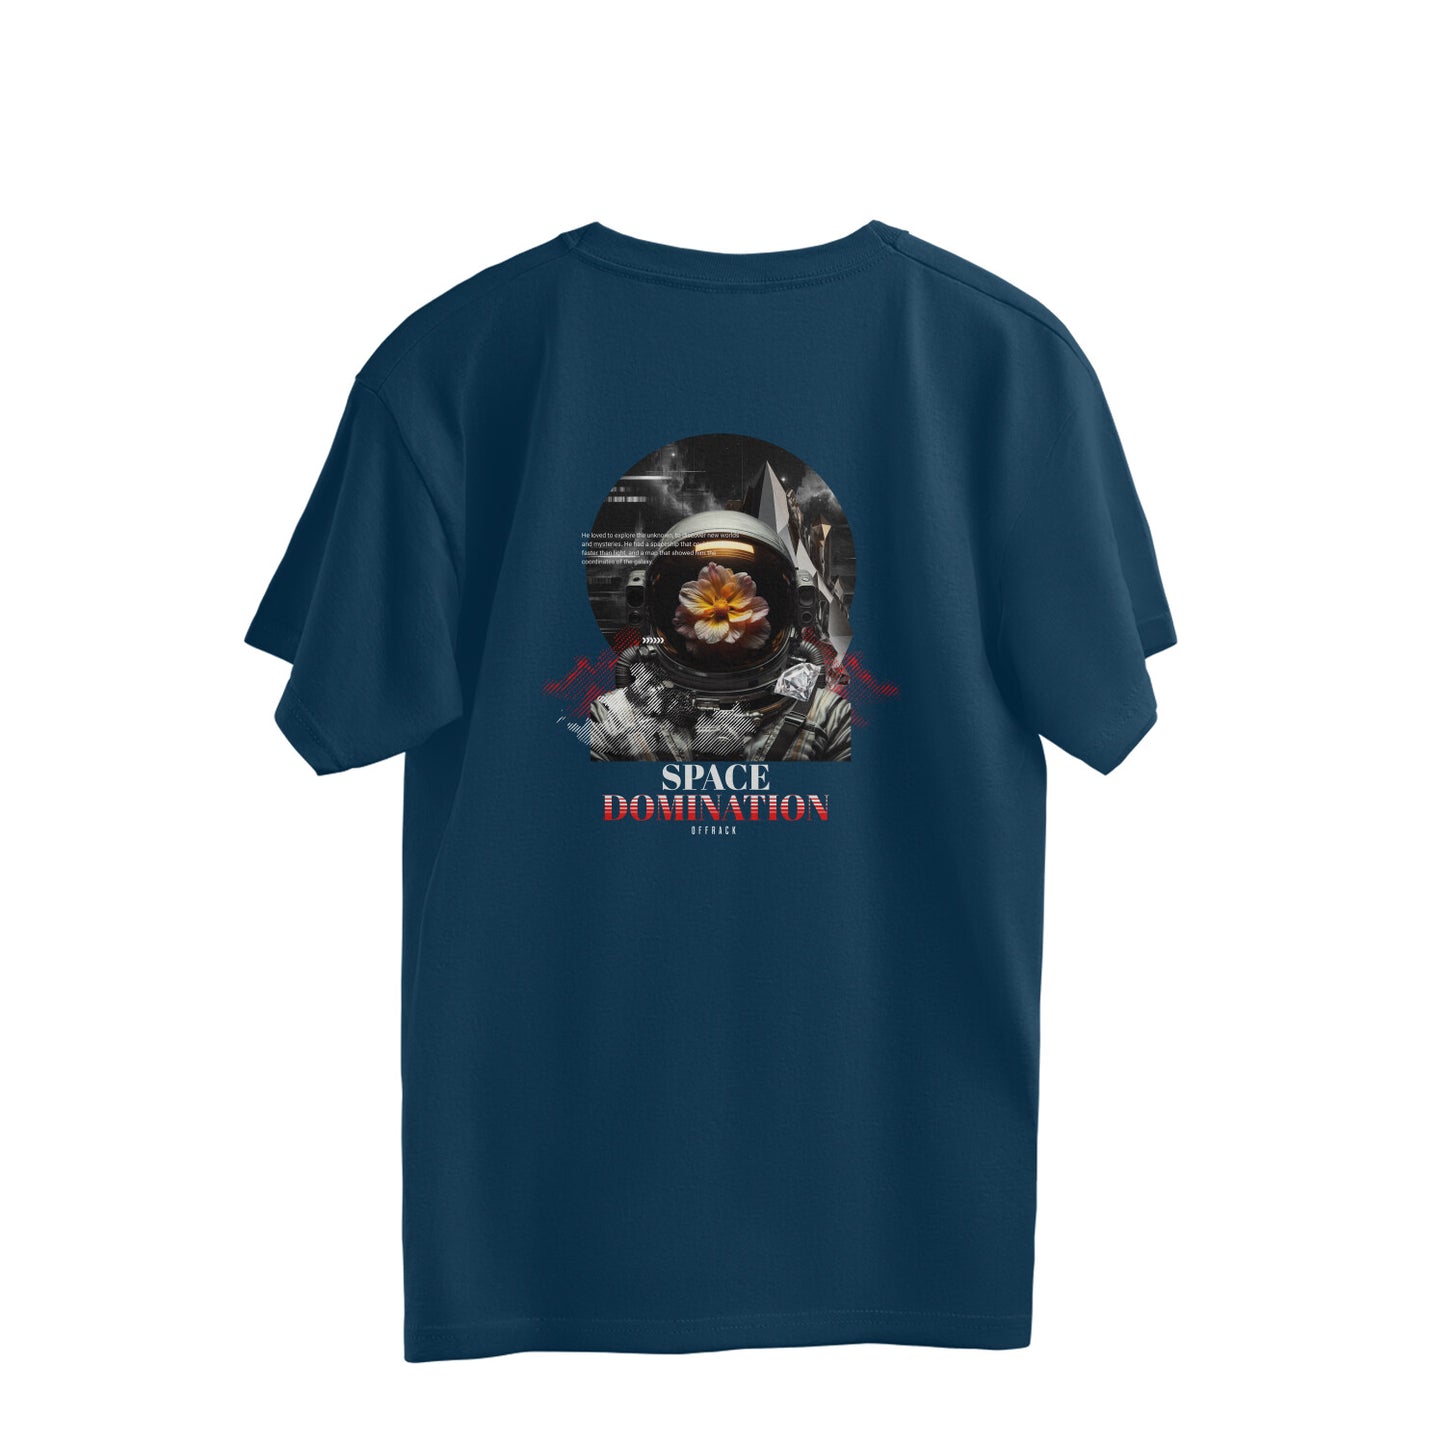 Space Domination - Navy Oversized